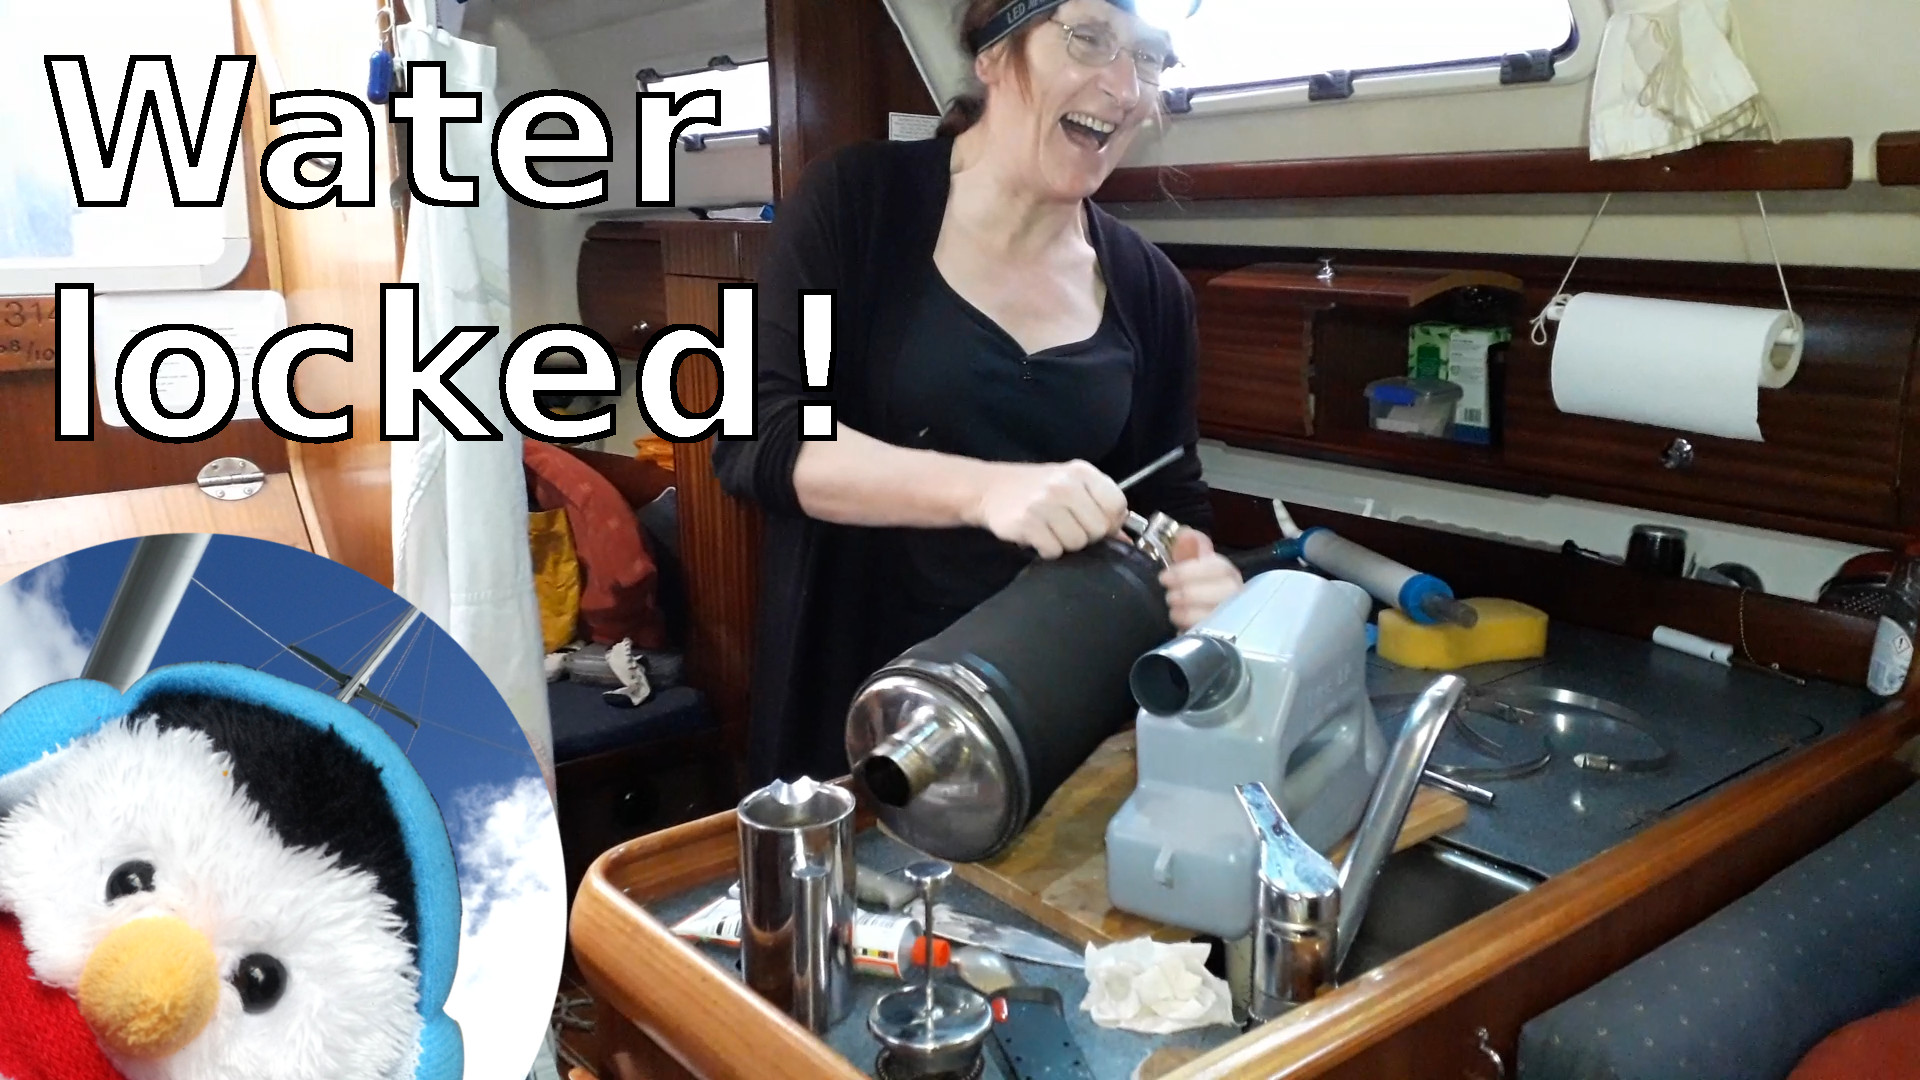 Watch our "Water locked" video and add comments etc.